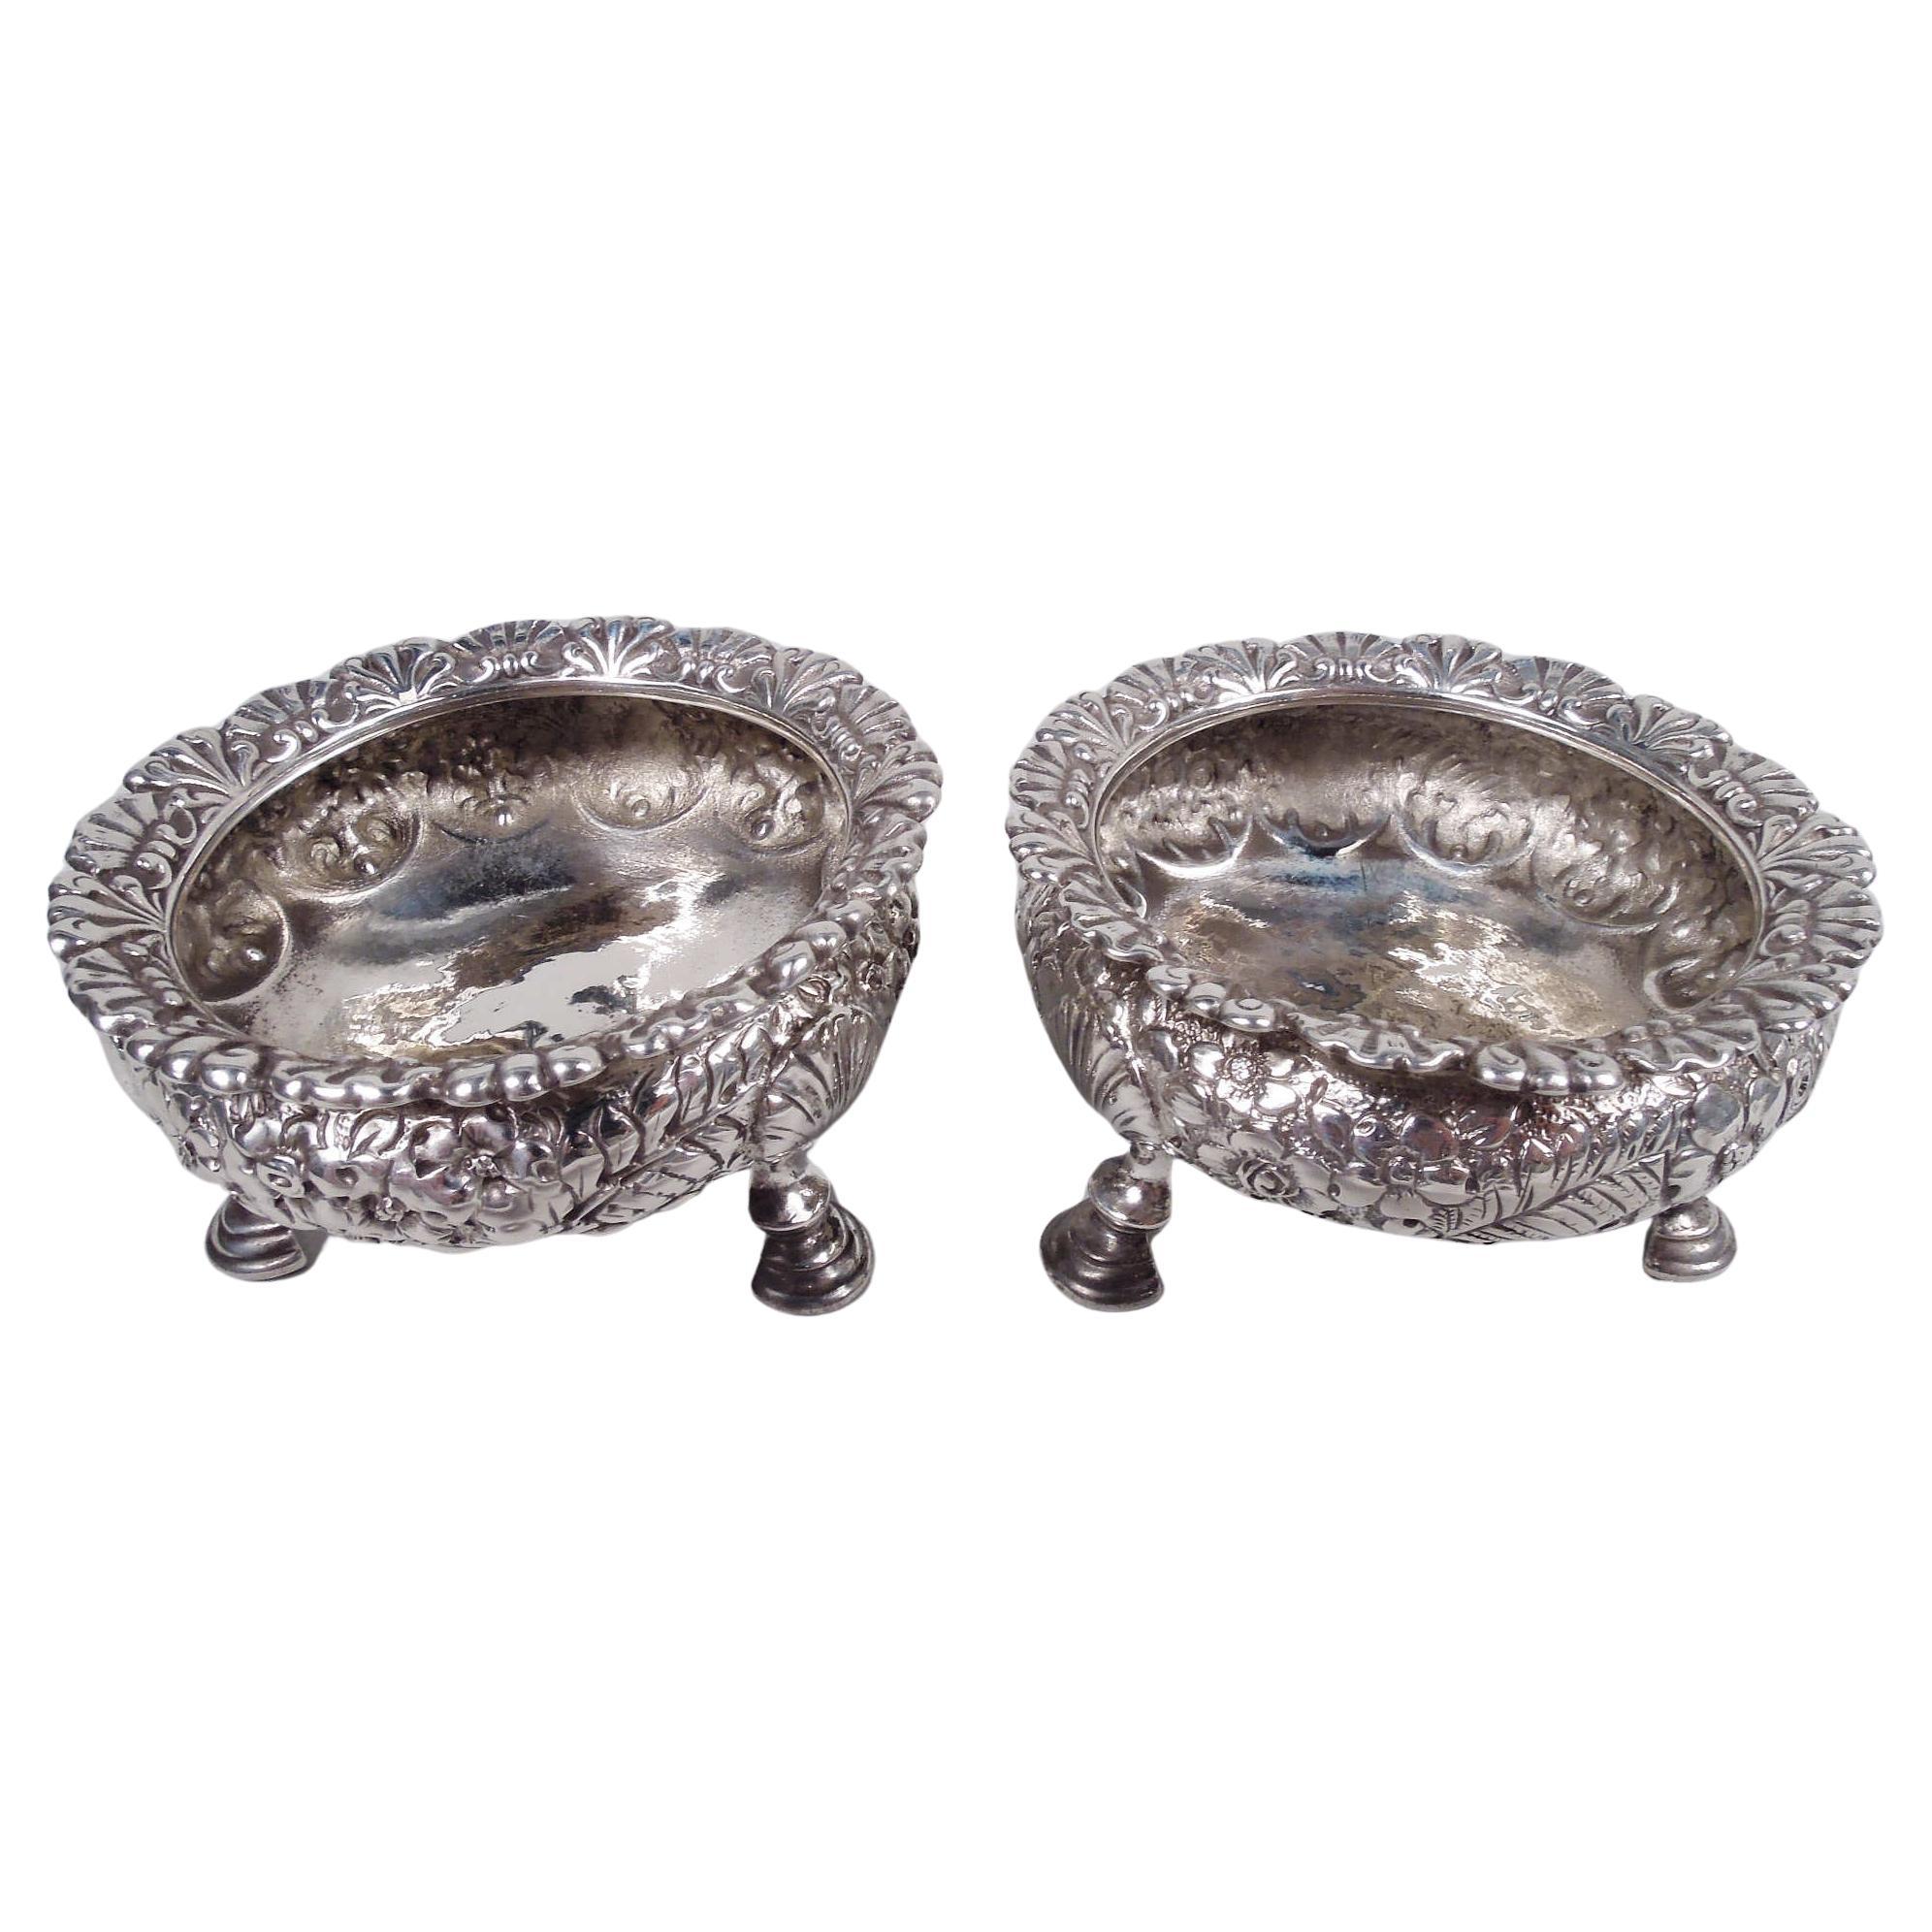 Pair of Tiffany Victorian Classical Sterling Silver Open Salts